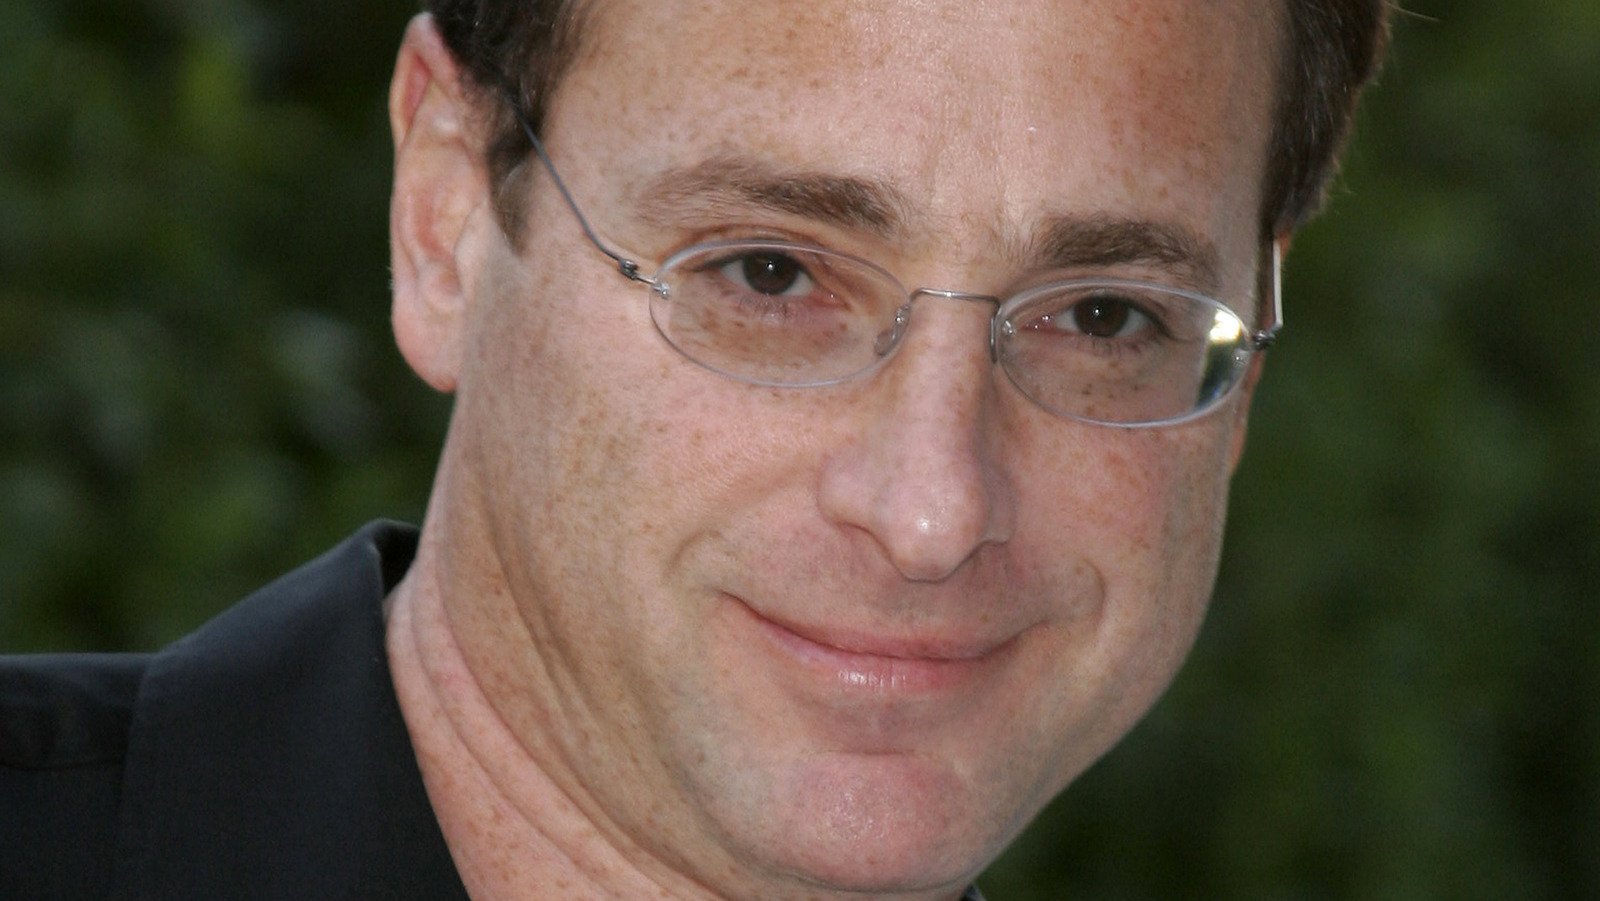 The Full House Cast Comes Together To Mourn Bob Saget - The List